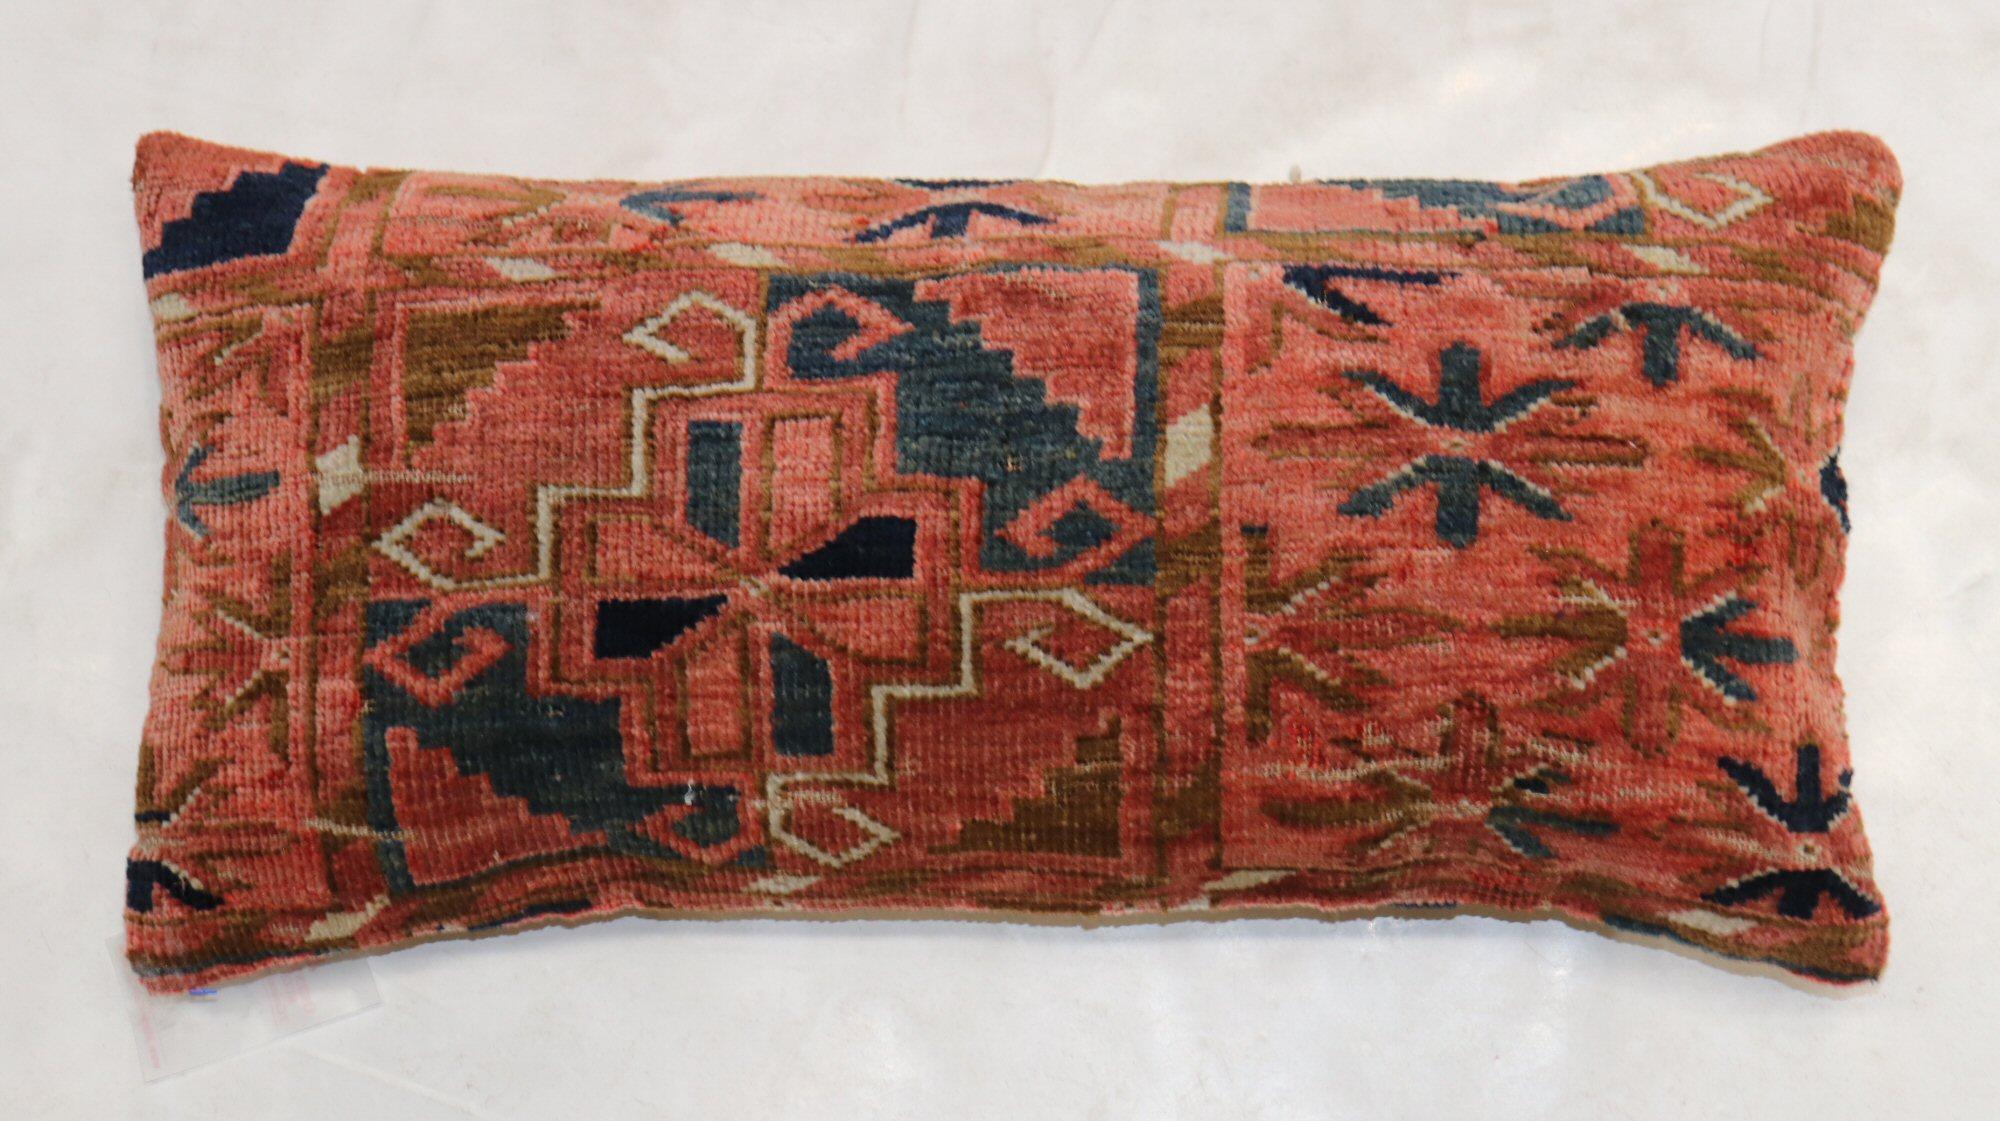 Pillow made from a 19th-century Turkeman rug in a bolster size.

Measures: 12